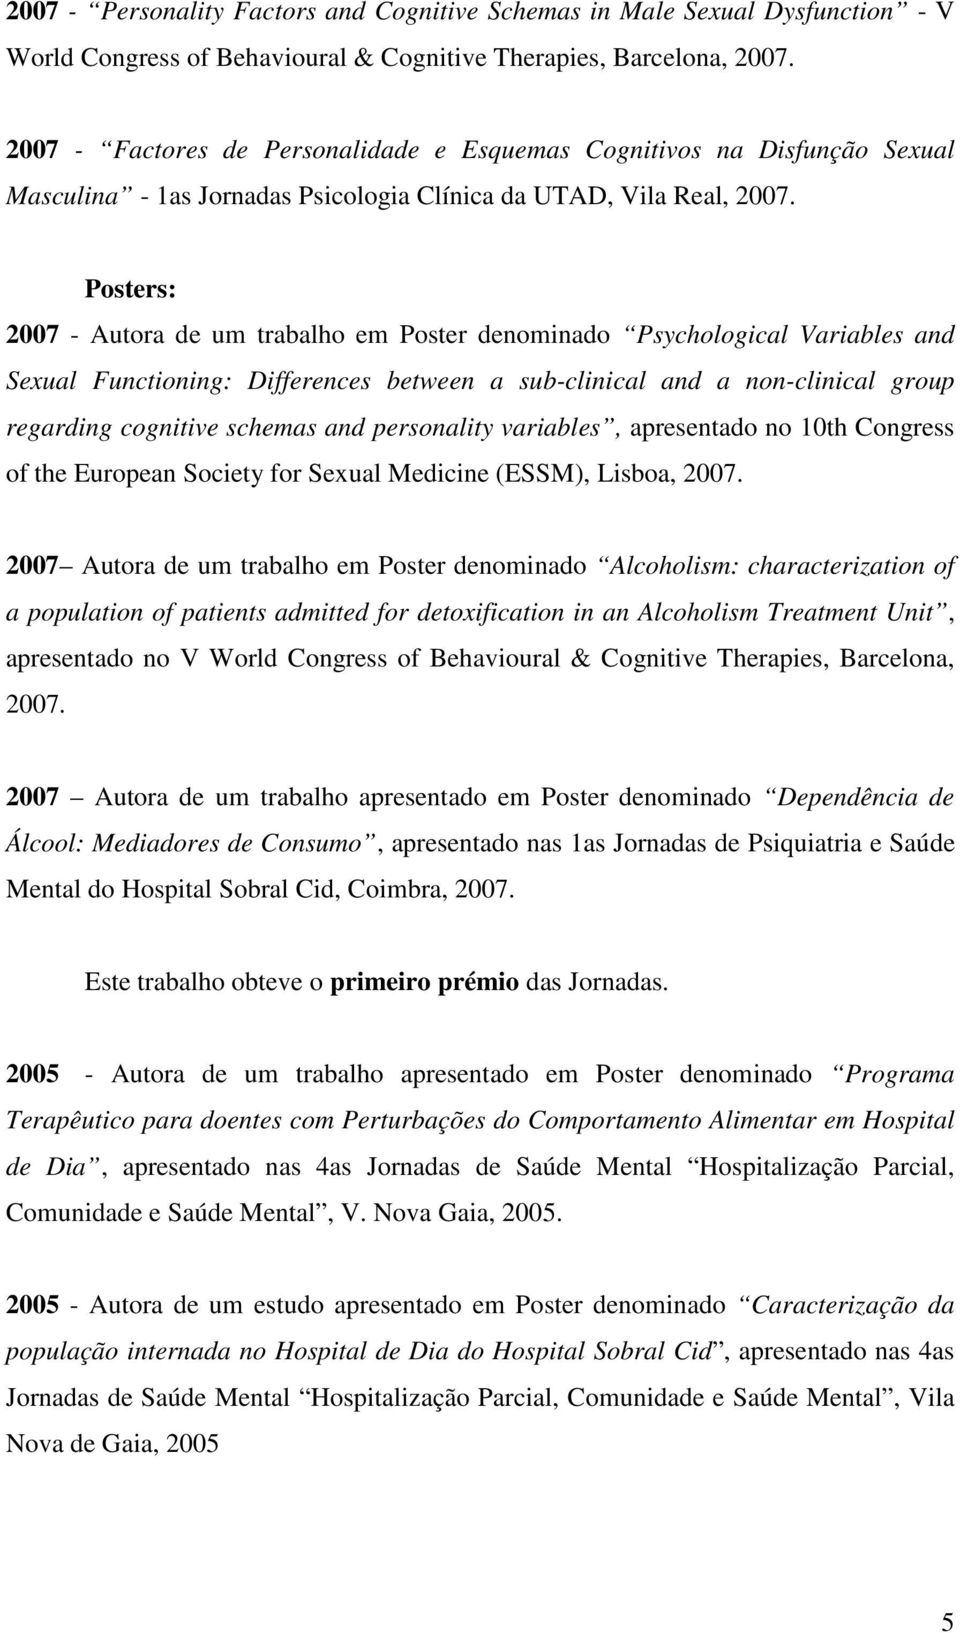 Posters: 2007 - Autora de um trabalho em Poster denominado Psychological Variables and Sexual Functioning: Differences between a sub-clinical and a non-clinical group regarding cognitive schemas and